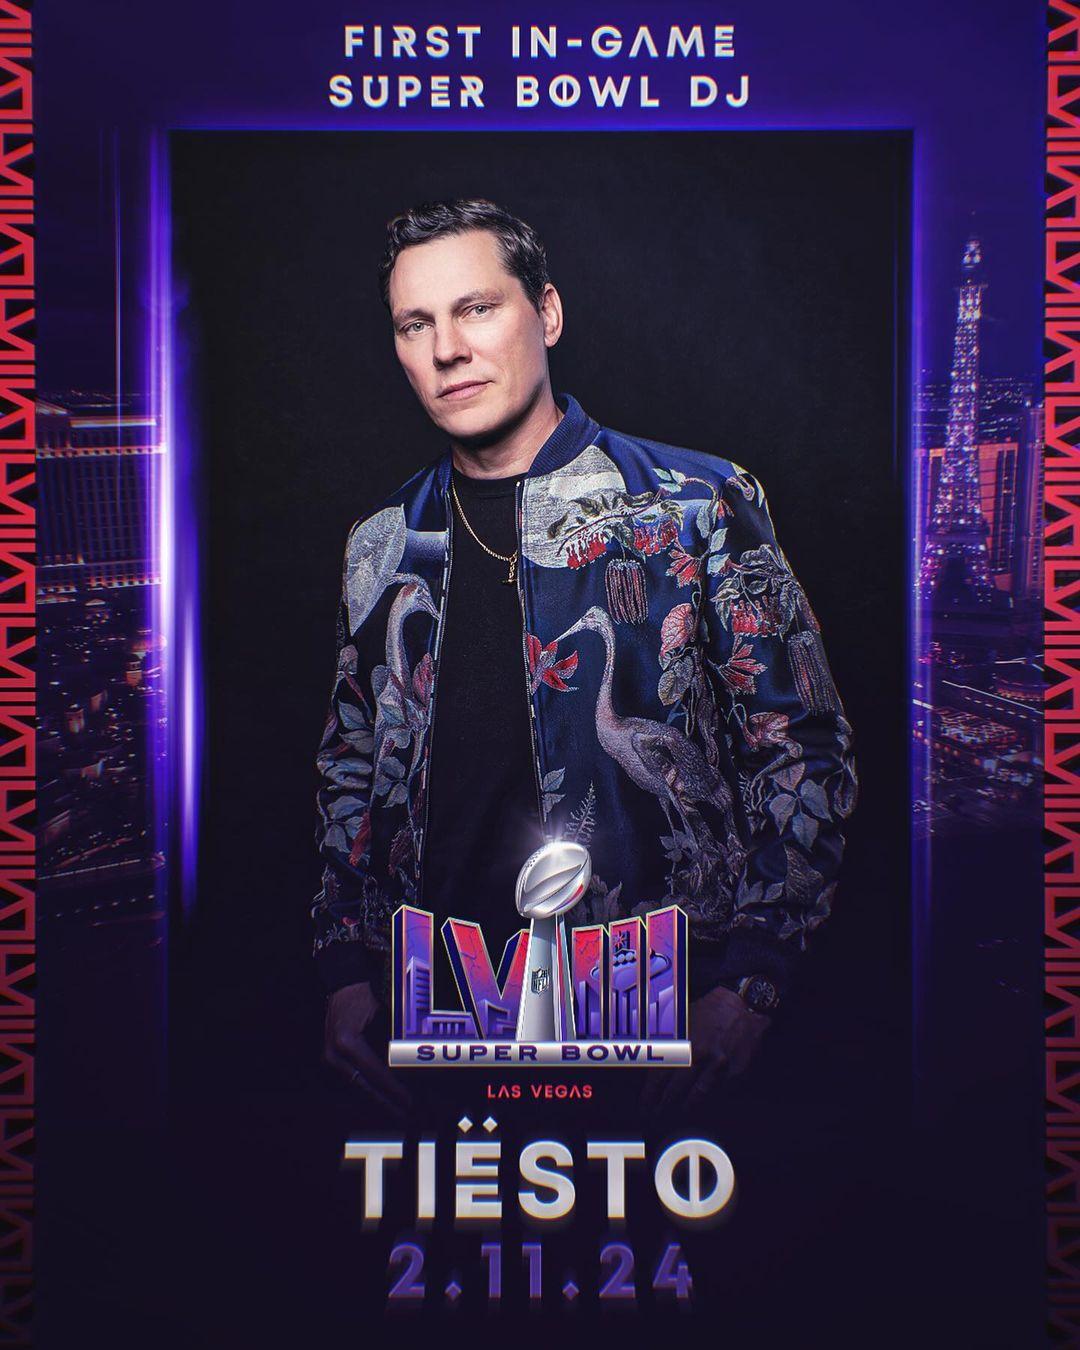 @tiesto will perform as the first in-game superstar DJ for Super Bowl LVIII! #SBLVIII